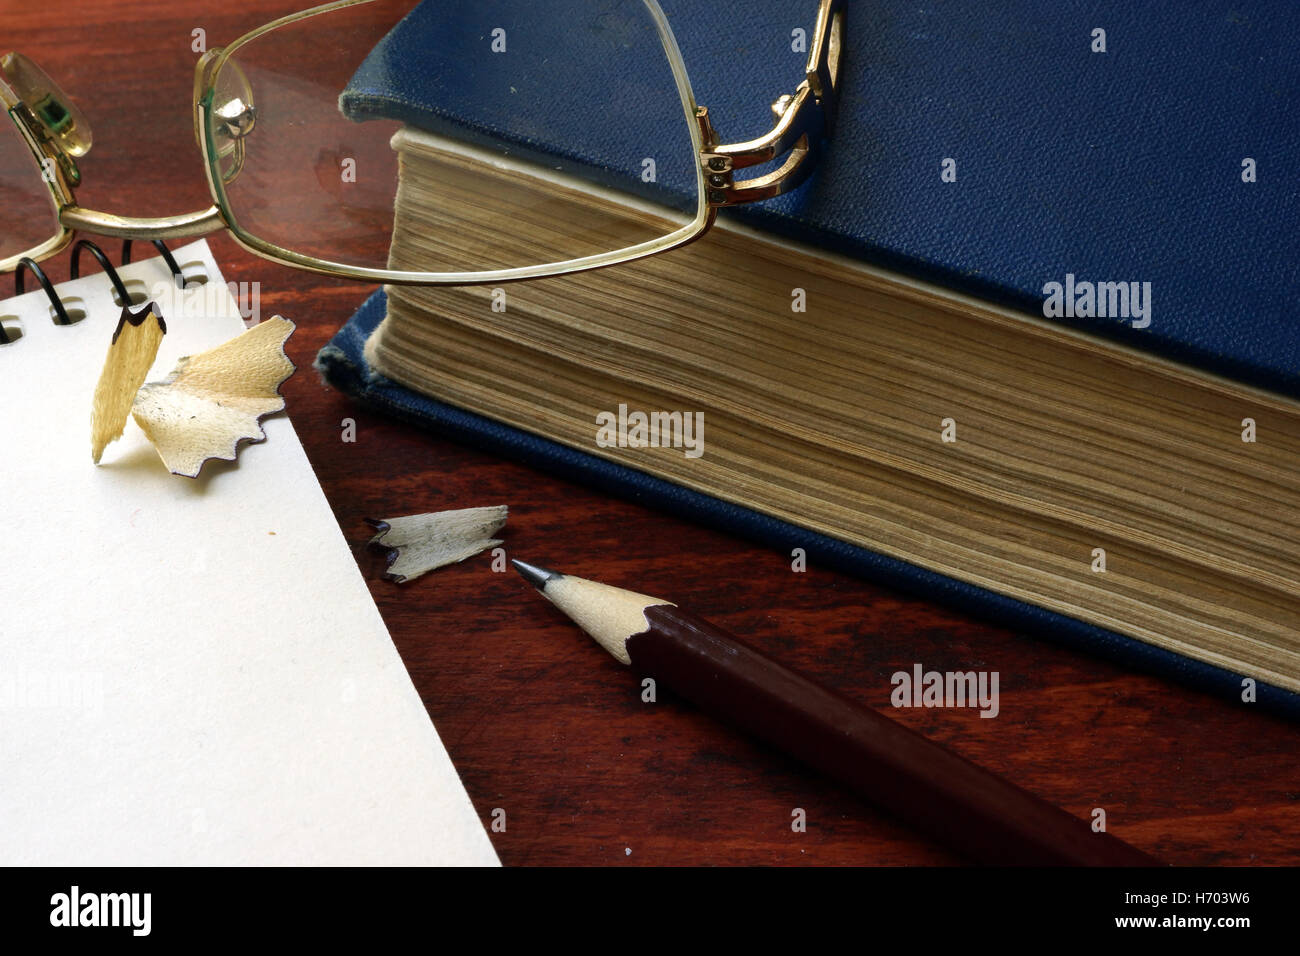 Pencil with glasses and books on wooden table. Stock Photo